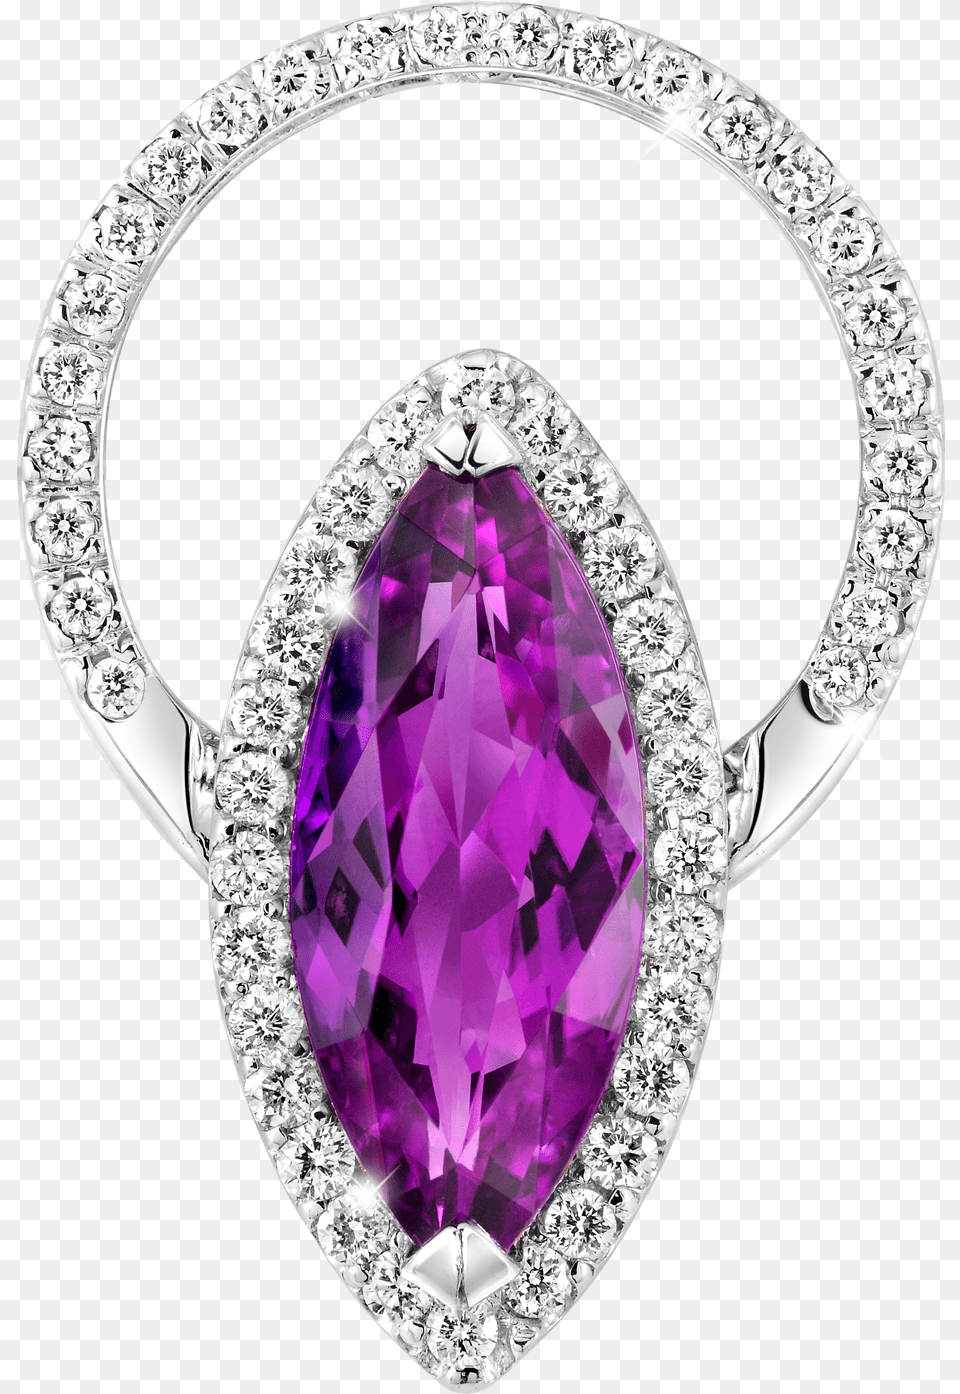 Amethyst Convertible Ring Diamond, Accessories, Gemstone, Jewelry, Ornament Png Image